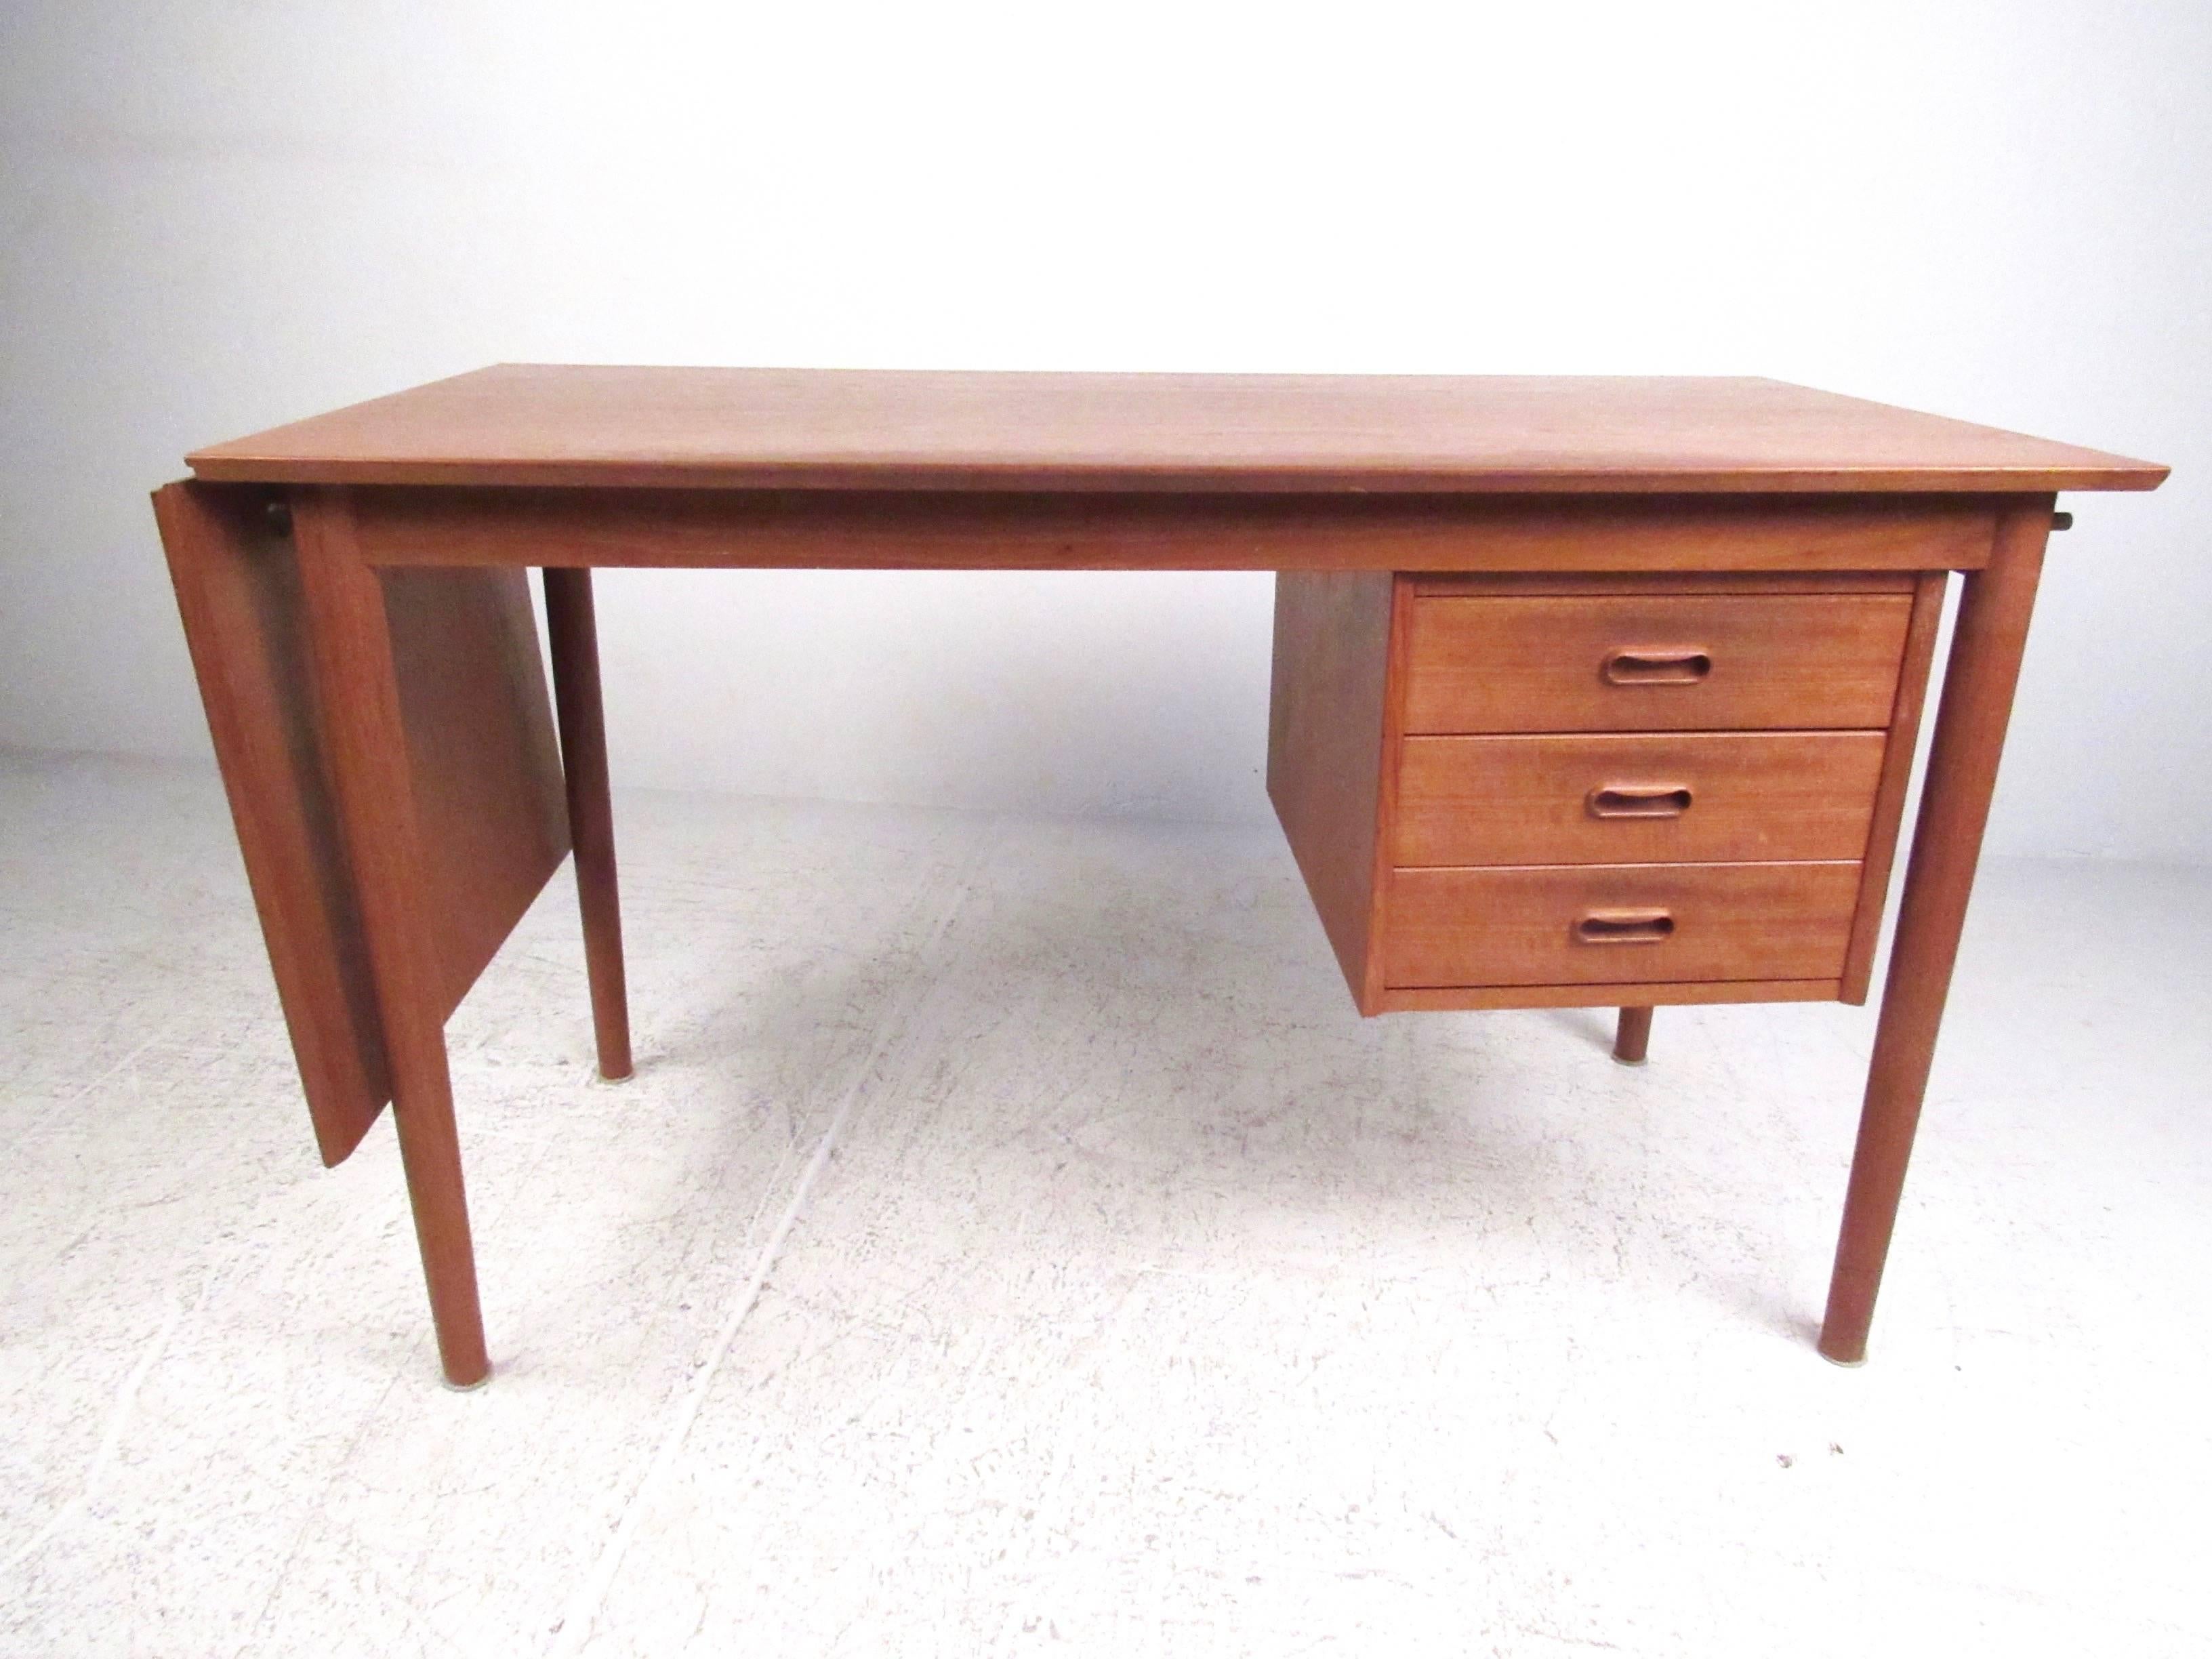 This versatile vintage teak desk features a movable three drawer cabinet that can be shifted from left to right side for customization of your layout. Perfect size for an occasional writing desk or home office, this drop leaf desk expands from 48.5'